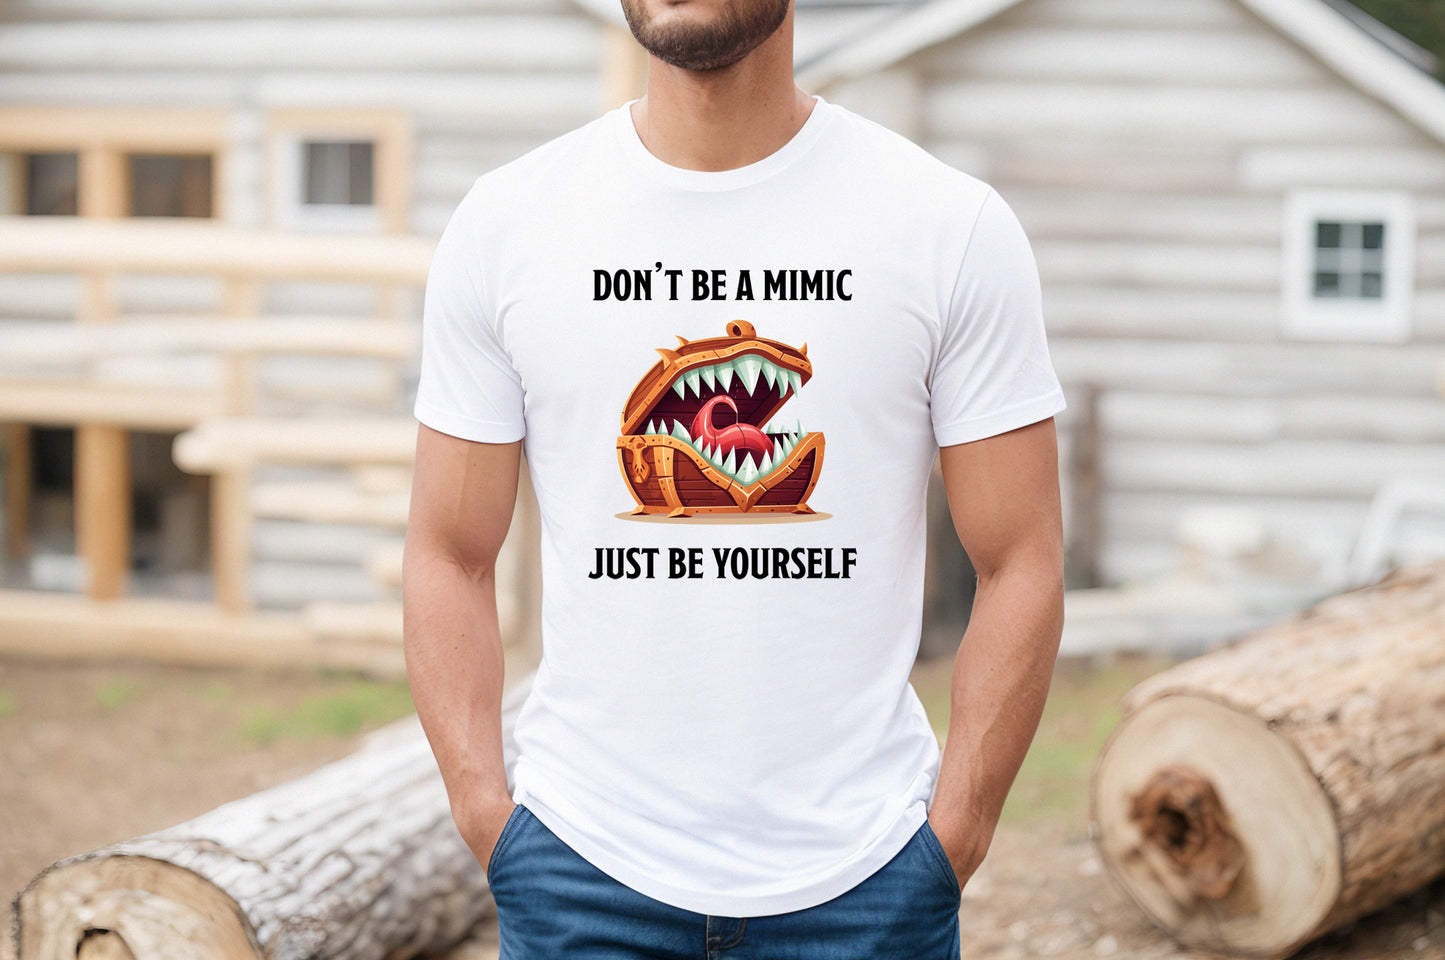 Don't Be A Mimic, Just Be Yourself Shirt, DnD Shirt, Dungeon Master Gift, D&D Tabletop Gaming Cotton TShirt, Inspirational Tee